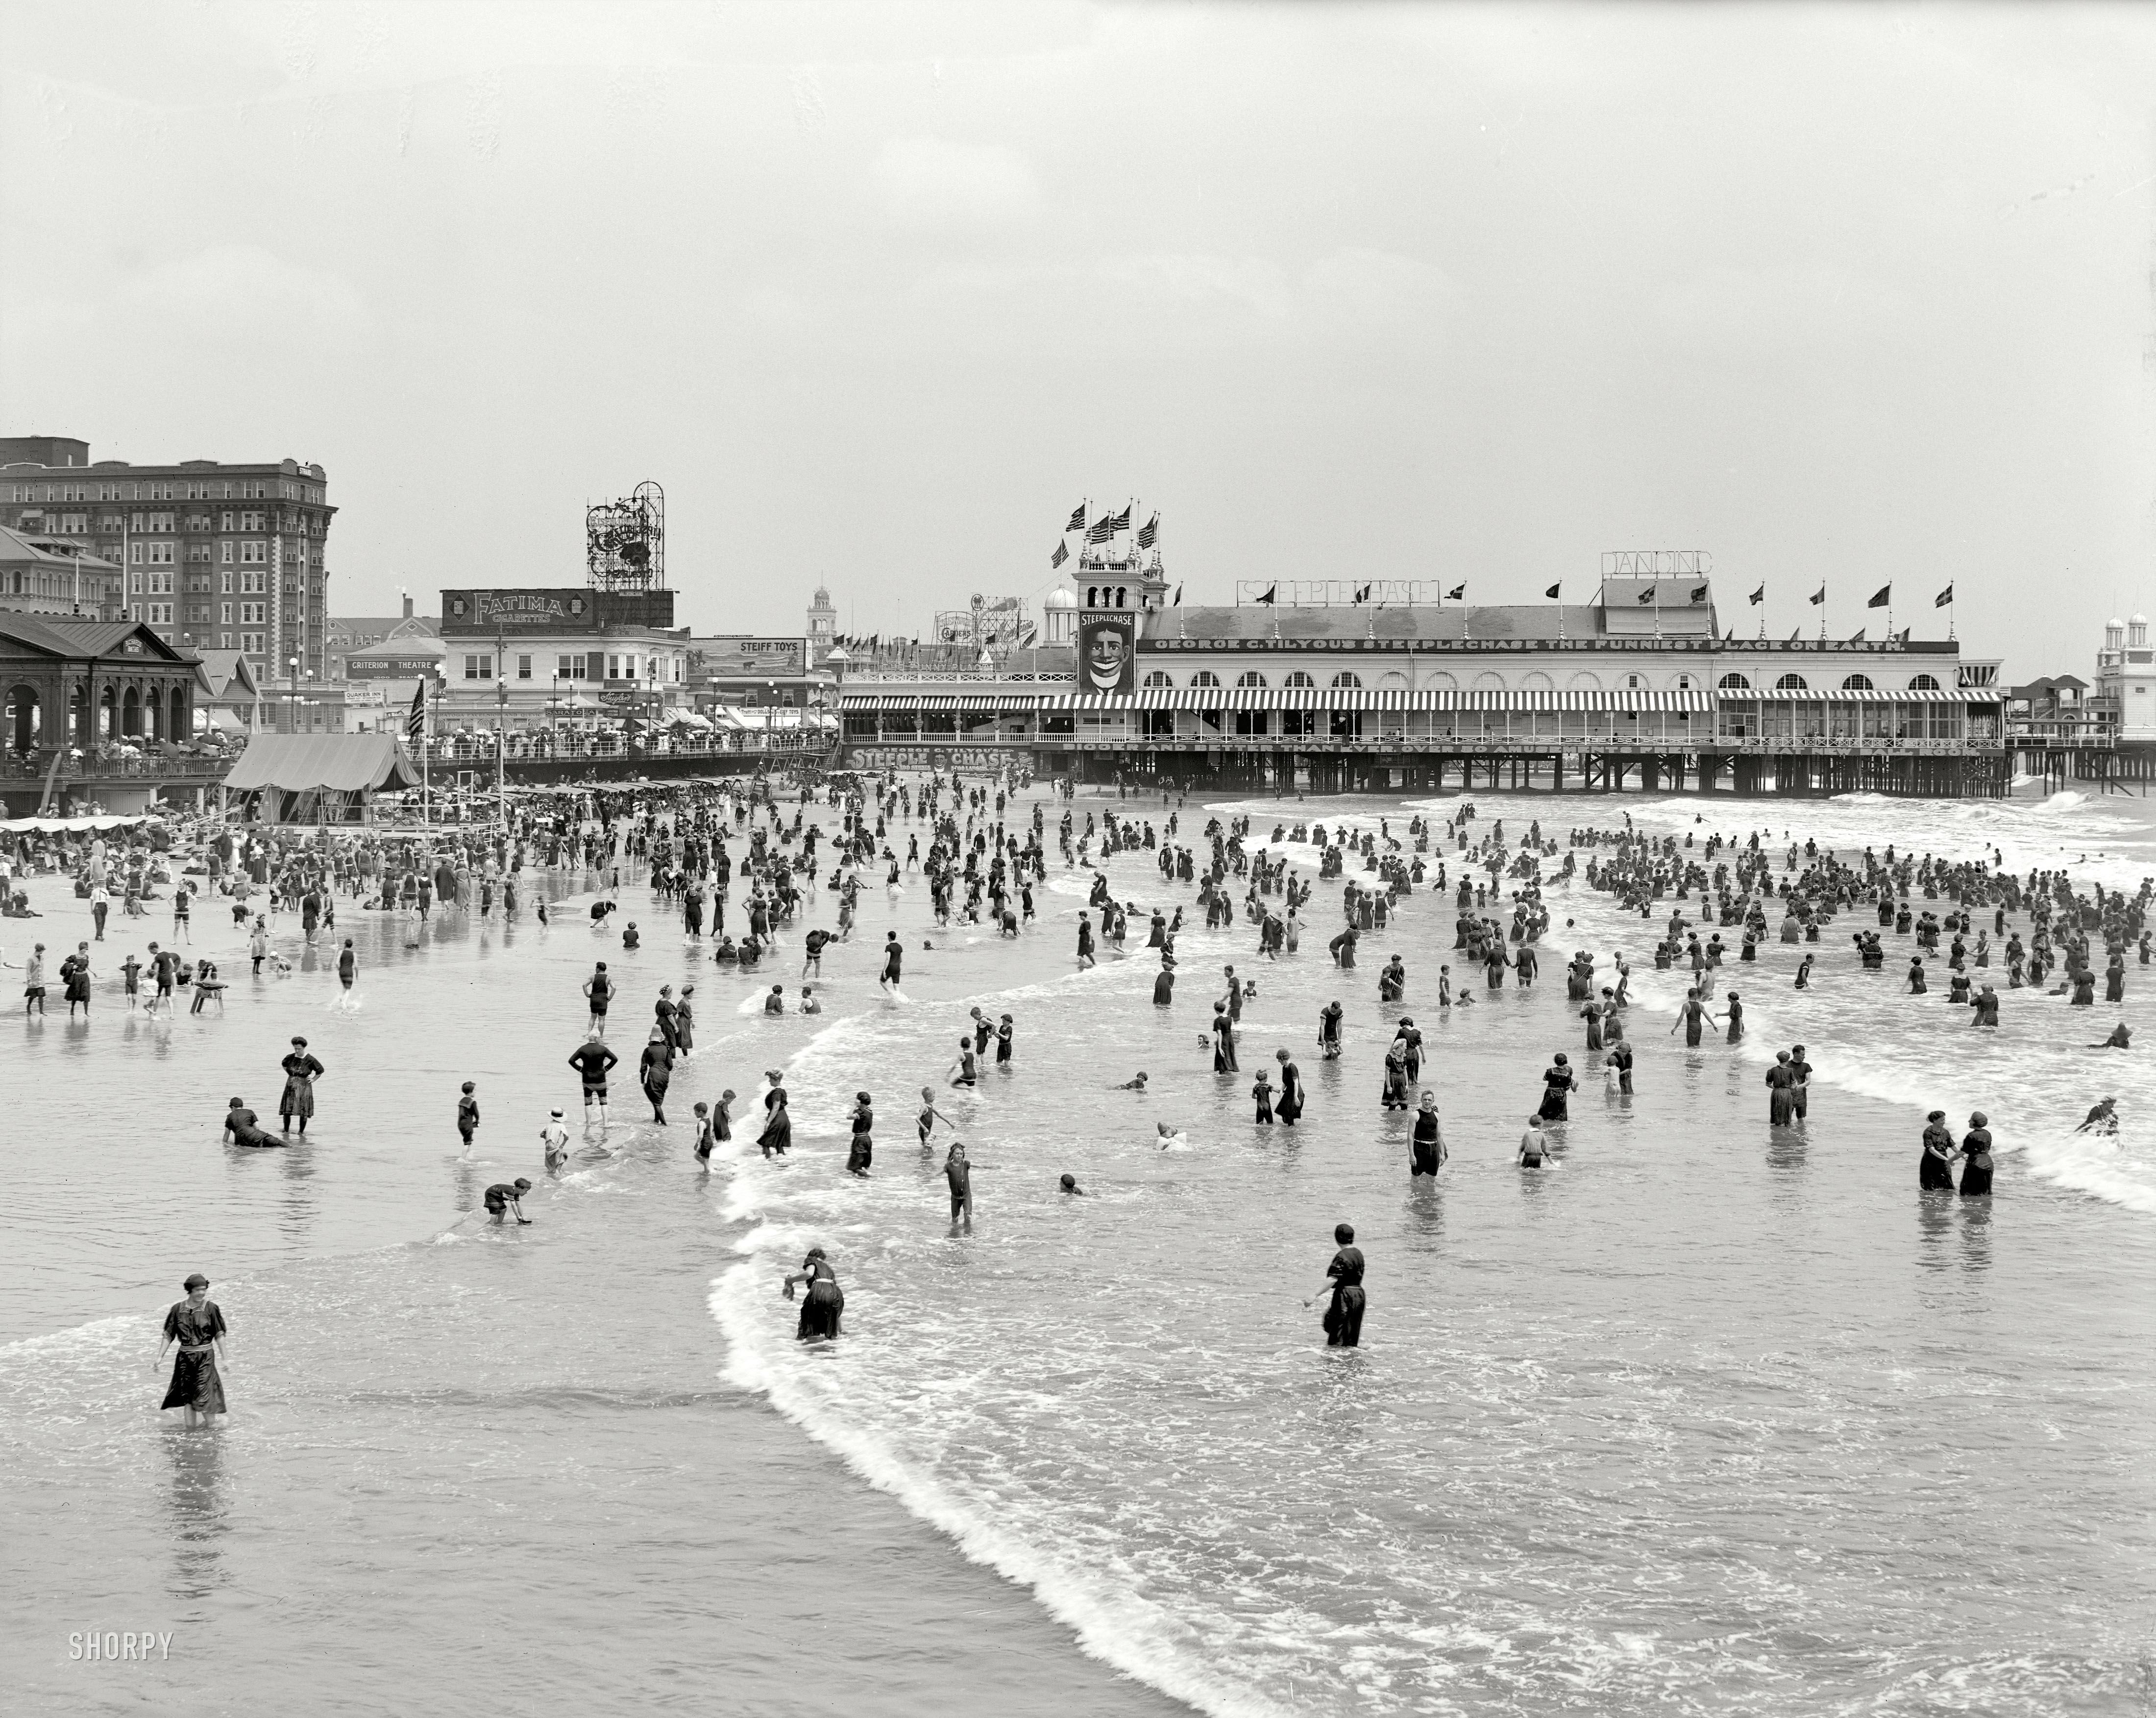 Atlantic City circa 1911. "Bathing at the Steeplechase." George C. Tilyou's Steeplechase Pier and some interesting signage, including a bear-filled Steiff Toys billboard. 8x10 inch glass negative, Detroit Publishing Company. View full size.